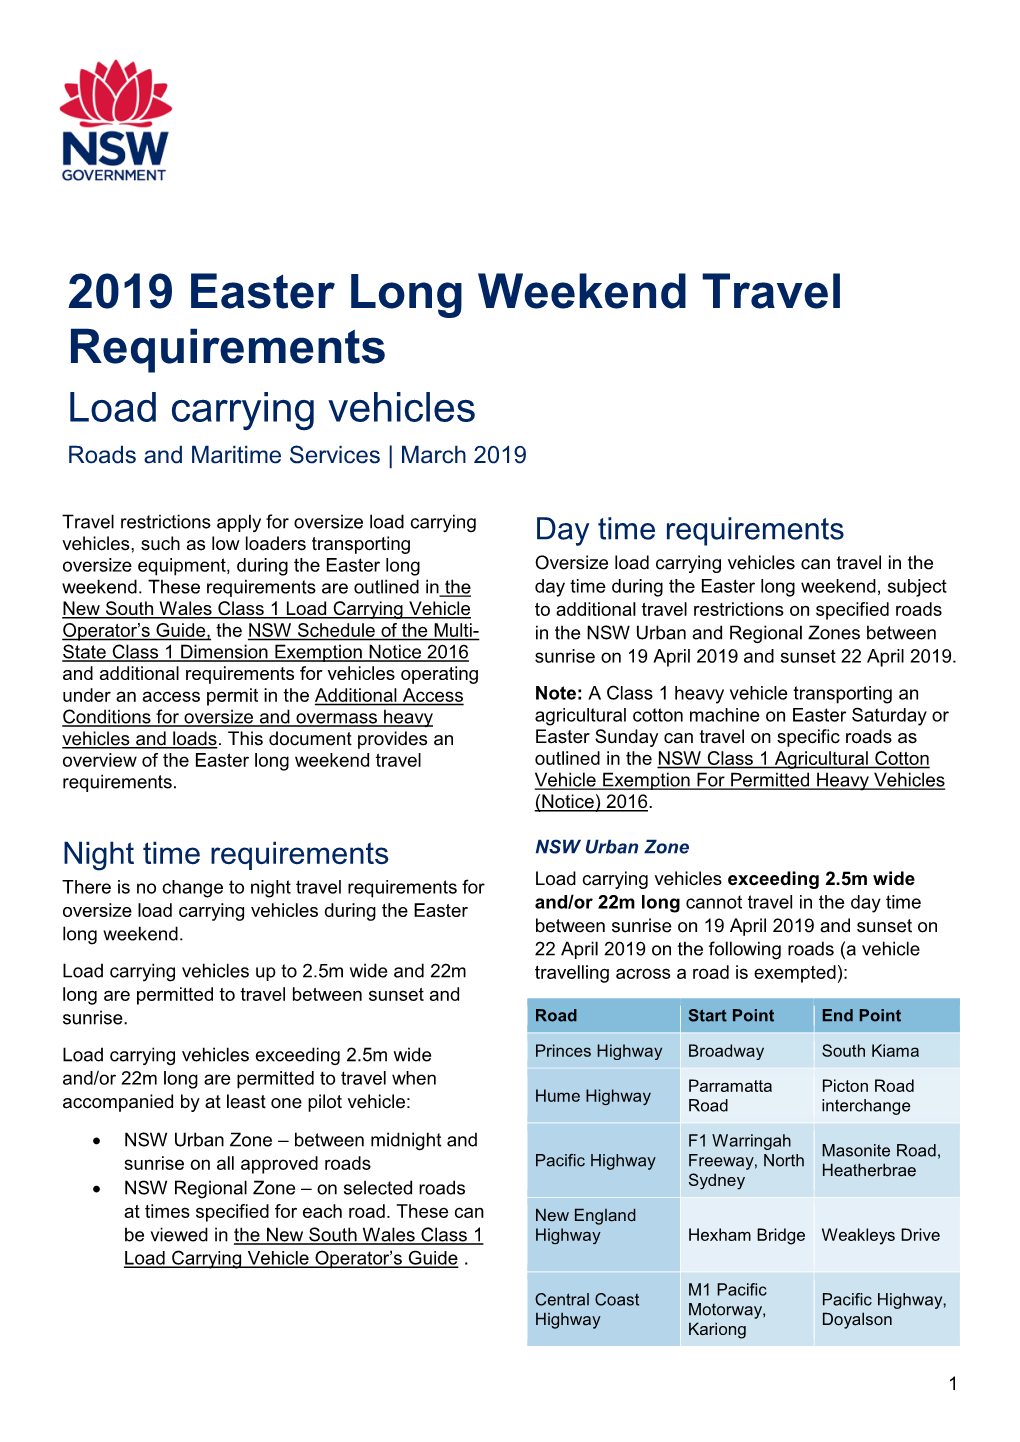 2019 Easter Long Weekend Travel Requirements Load Carrying Vehicles Roads and Maritime Services | March 2019